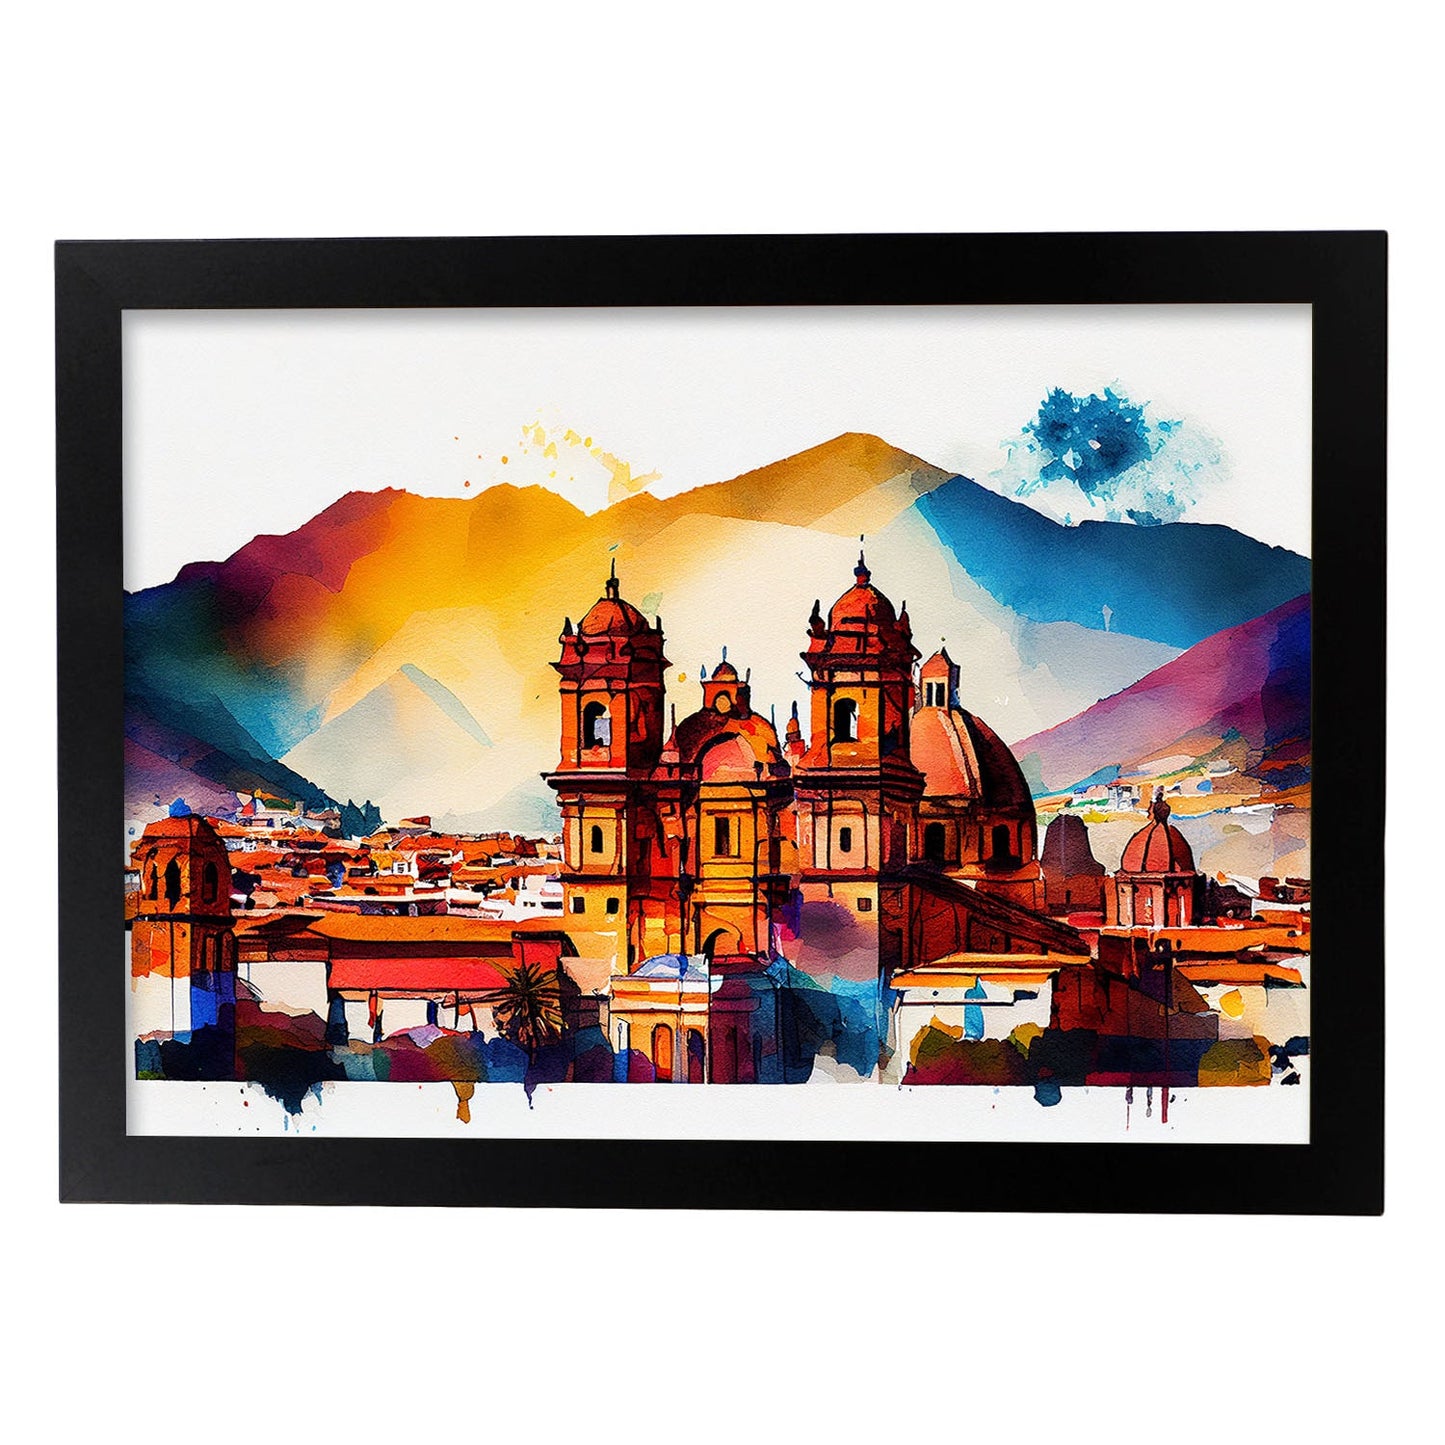 Nacnic watercolor of a skyline of the city of Cusco. Aesthetic Wall Art Prints for Bedroom or Living Room Design.